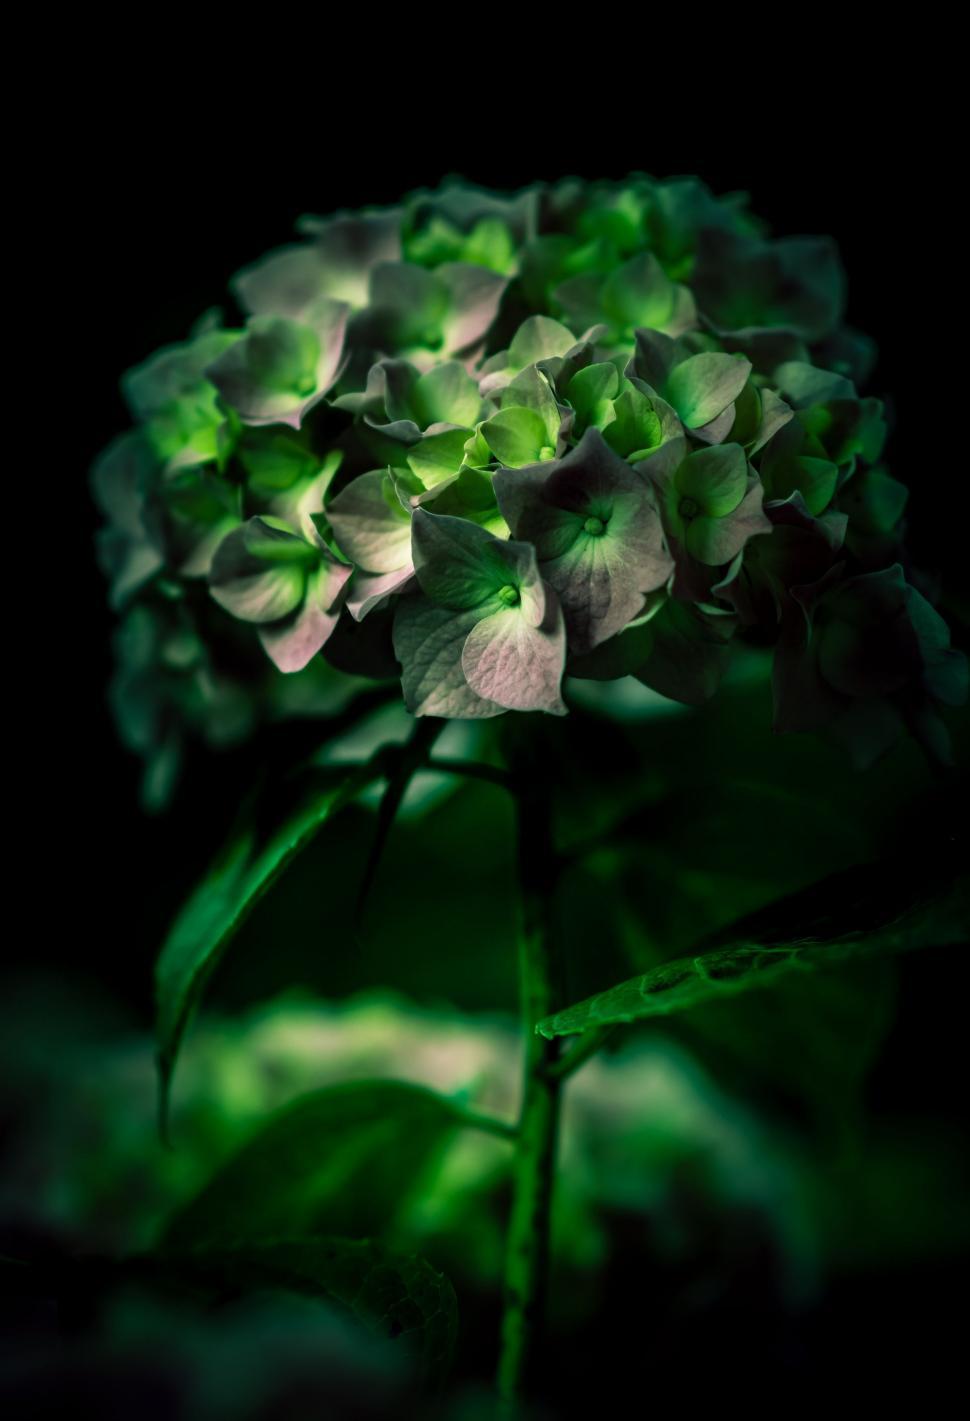 Free Image of Close Up of a Green Flower on a Black Background 